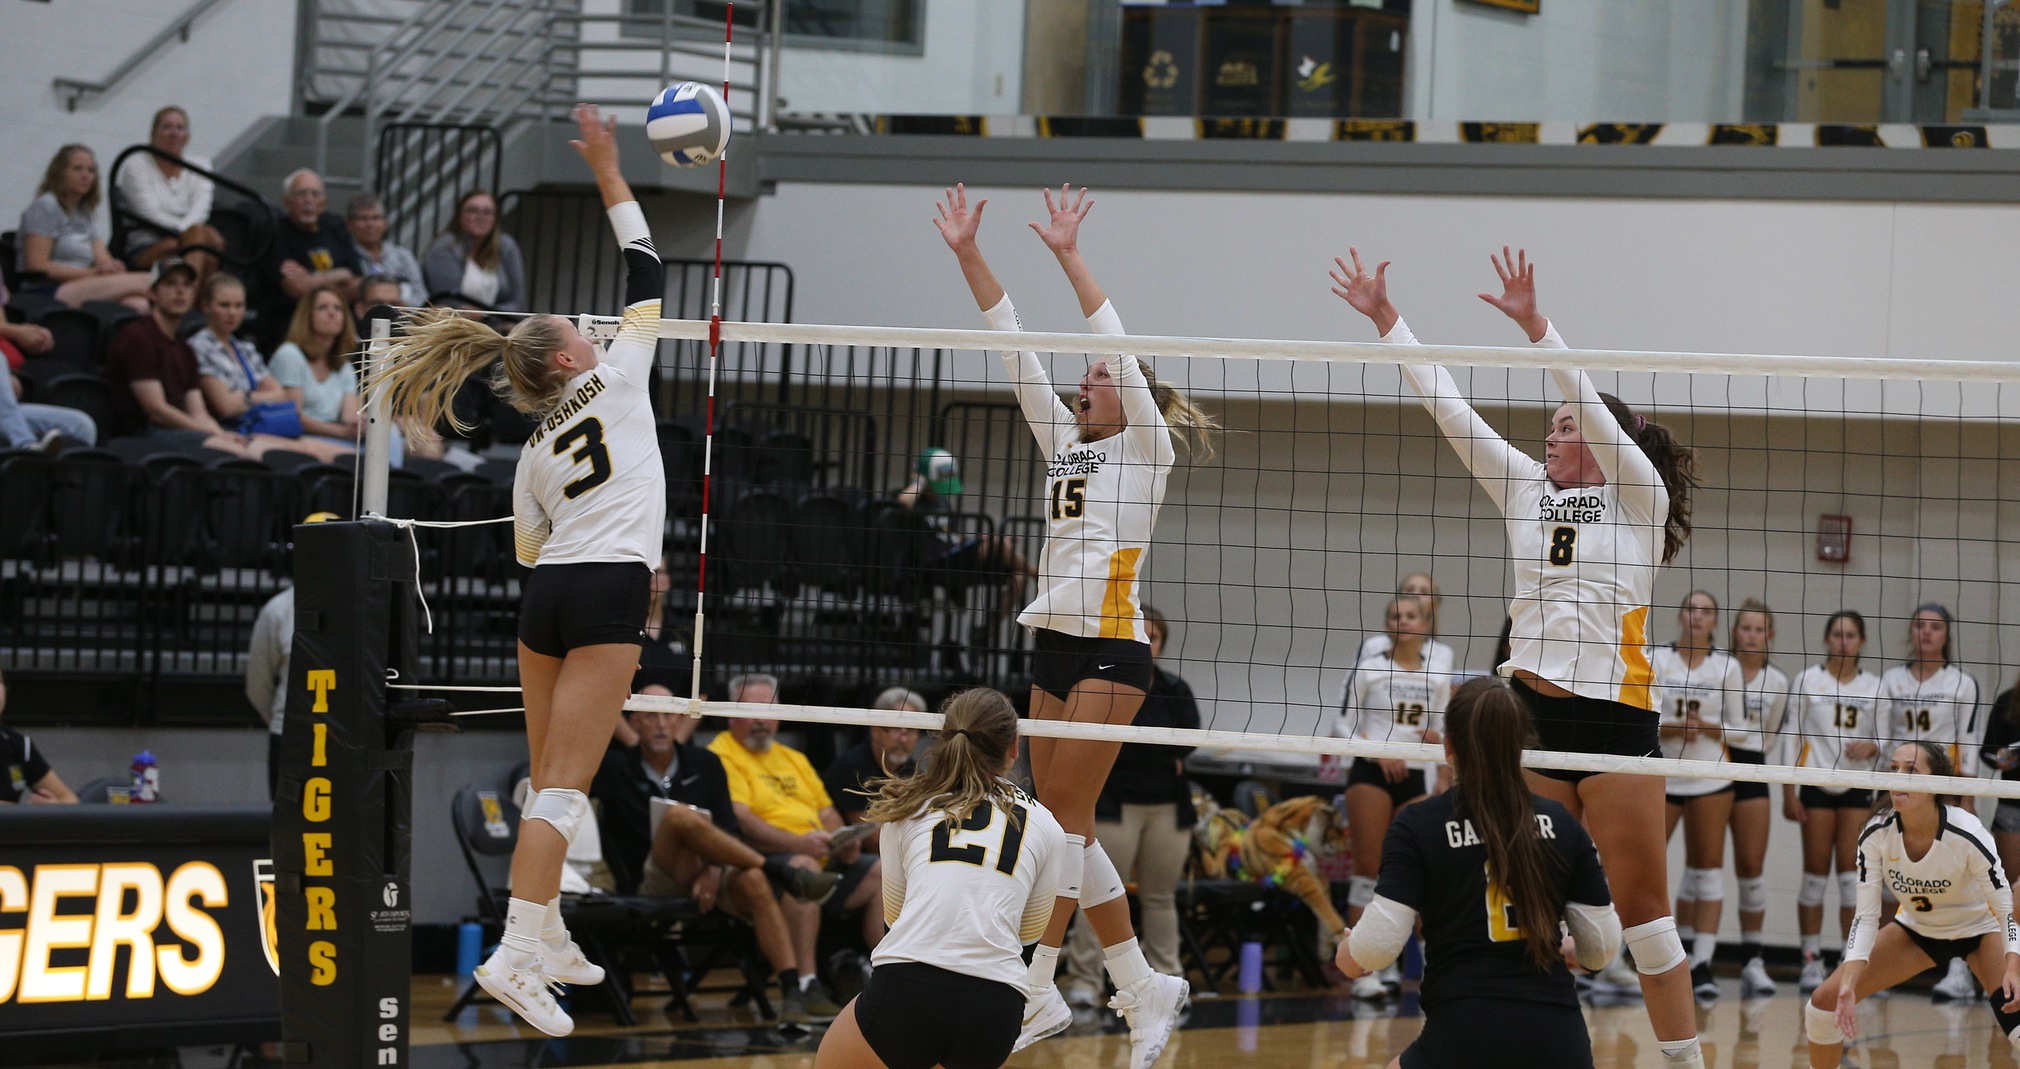 Carissa Sundholm had five kills and nine digs during UW-Oshkosh's loss to seventh-ranked Colorado College.